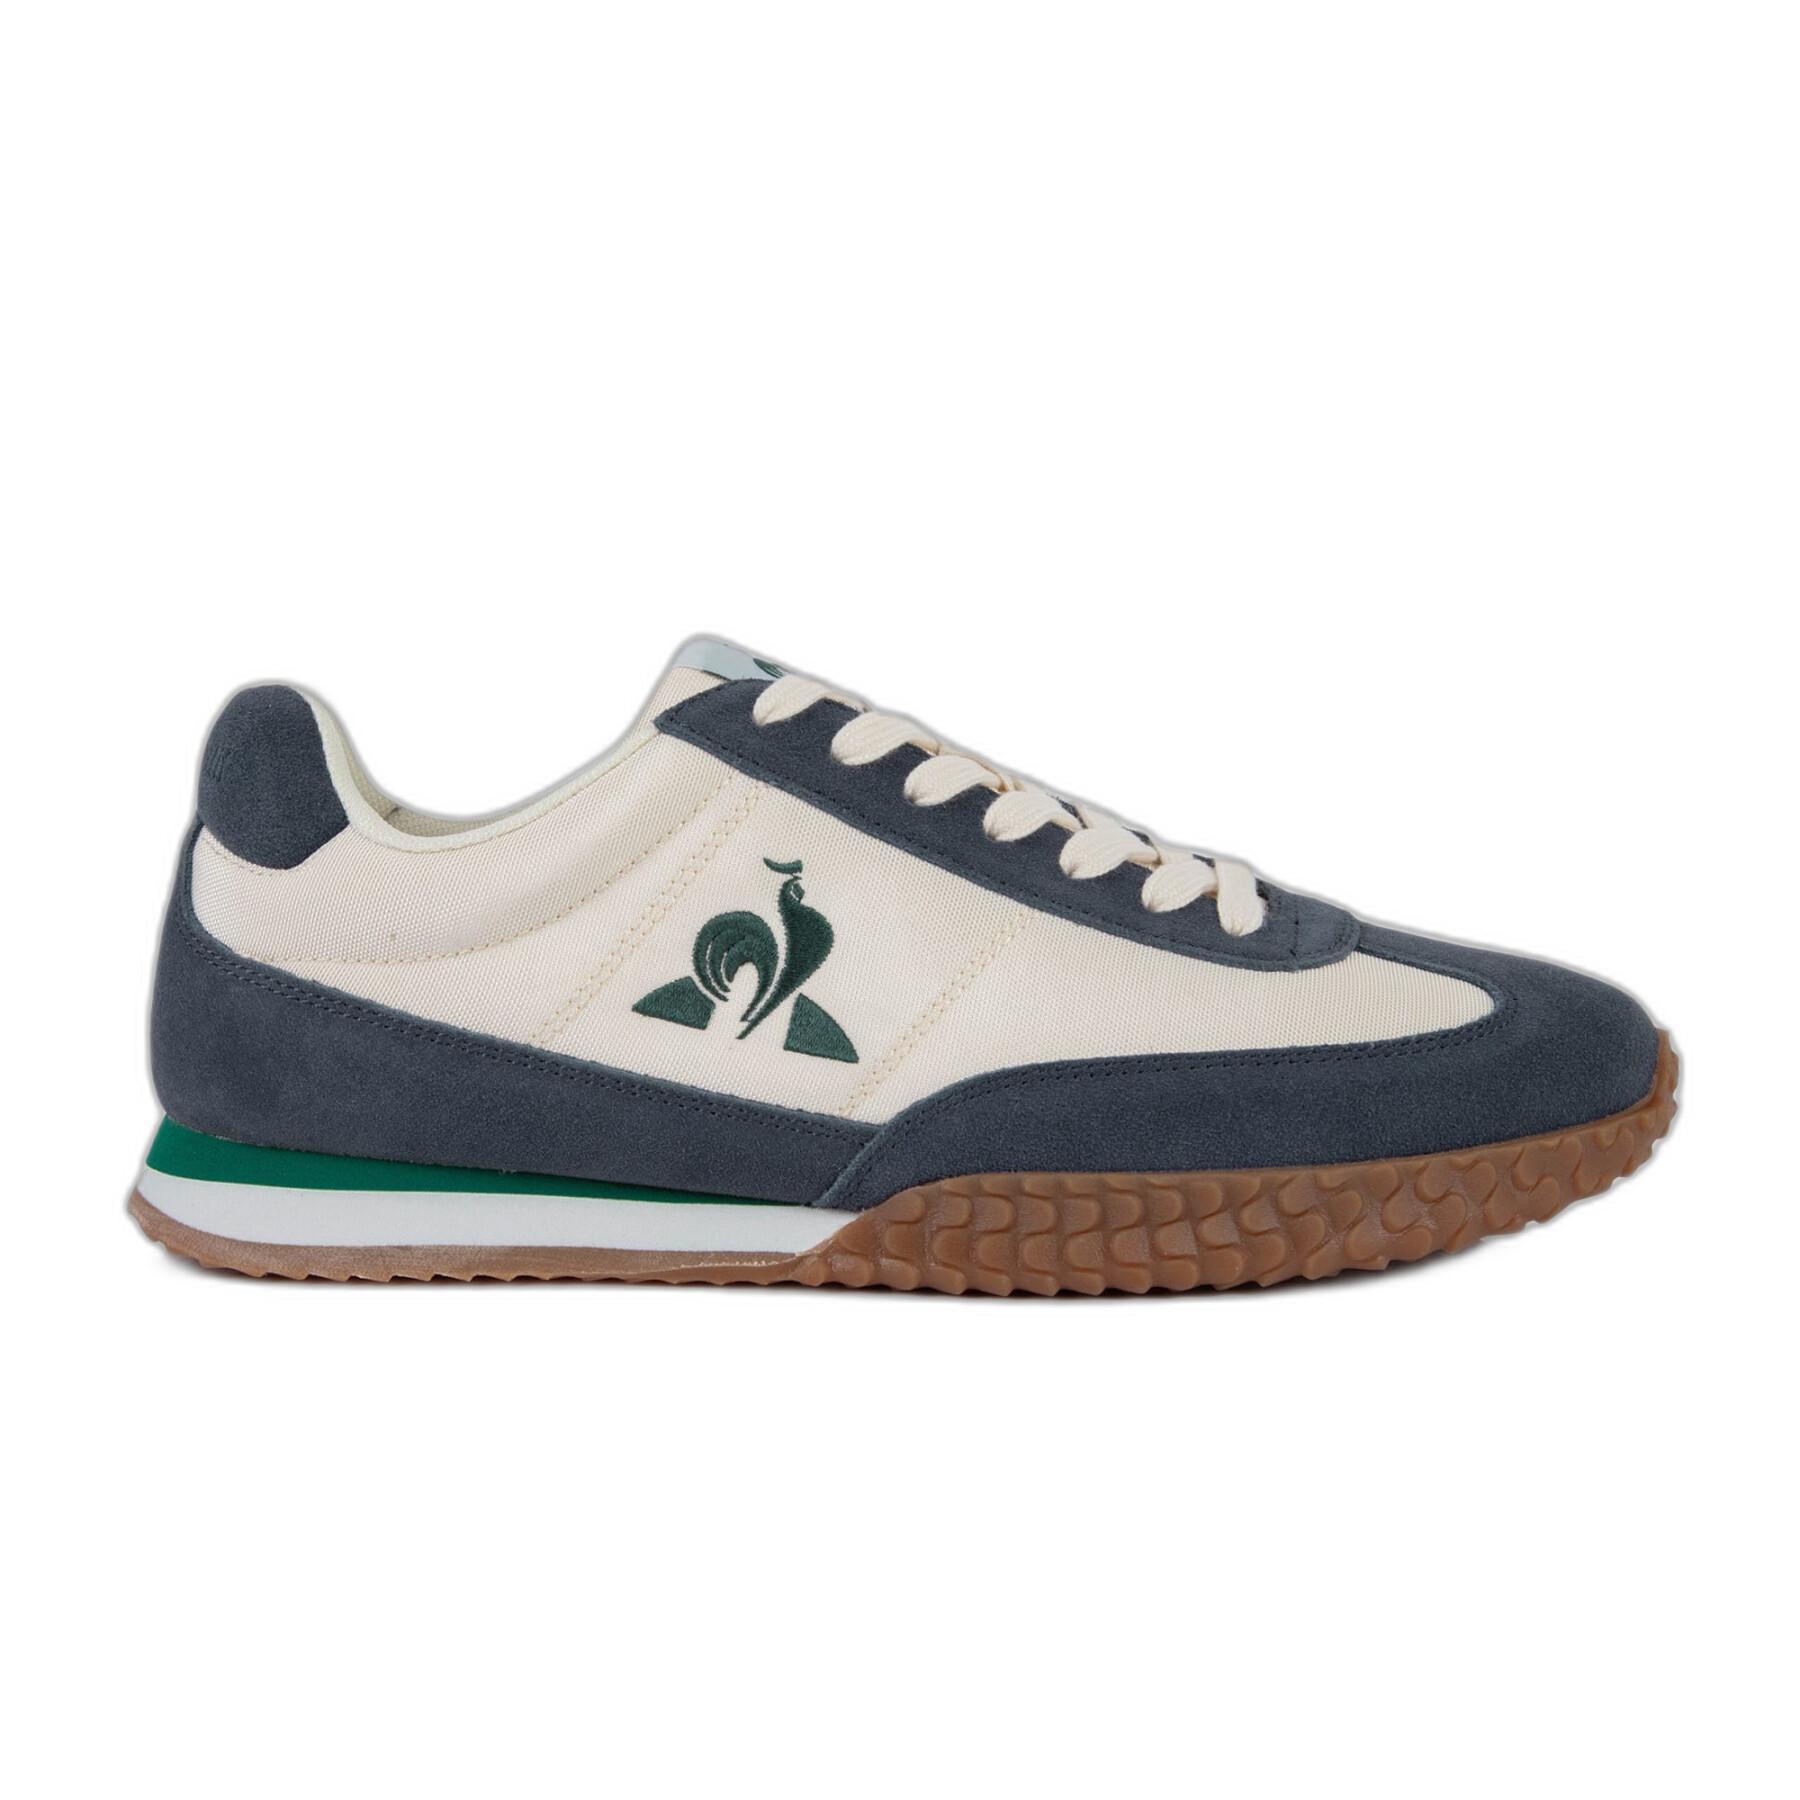 Sneakers Le Coq Sportif Lcs R500 Ps Iridescent